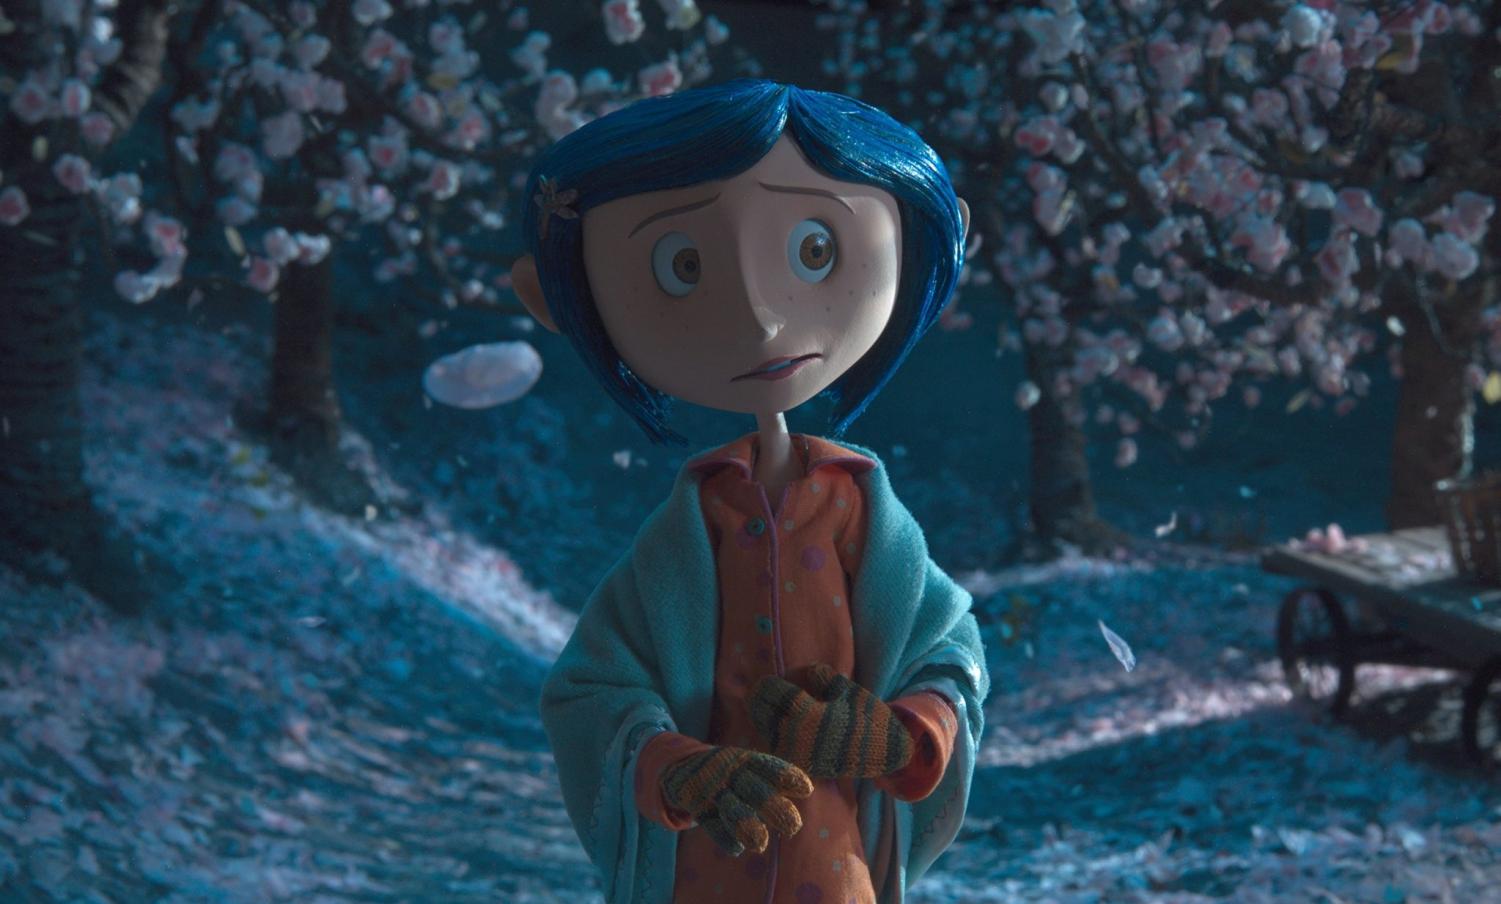 Coraline” Review – The Communicator